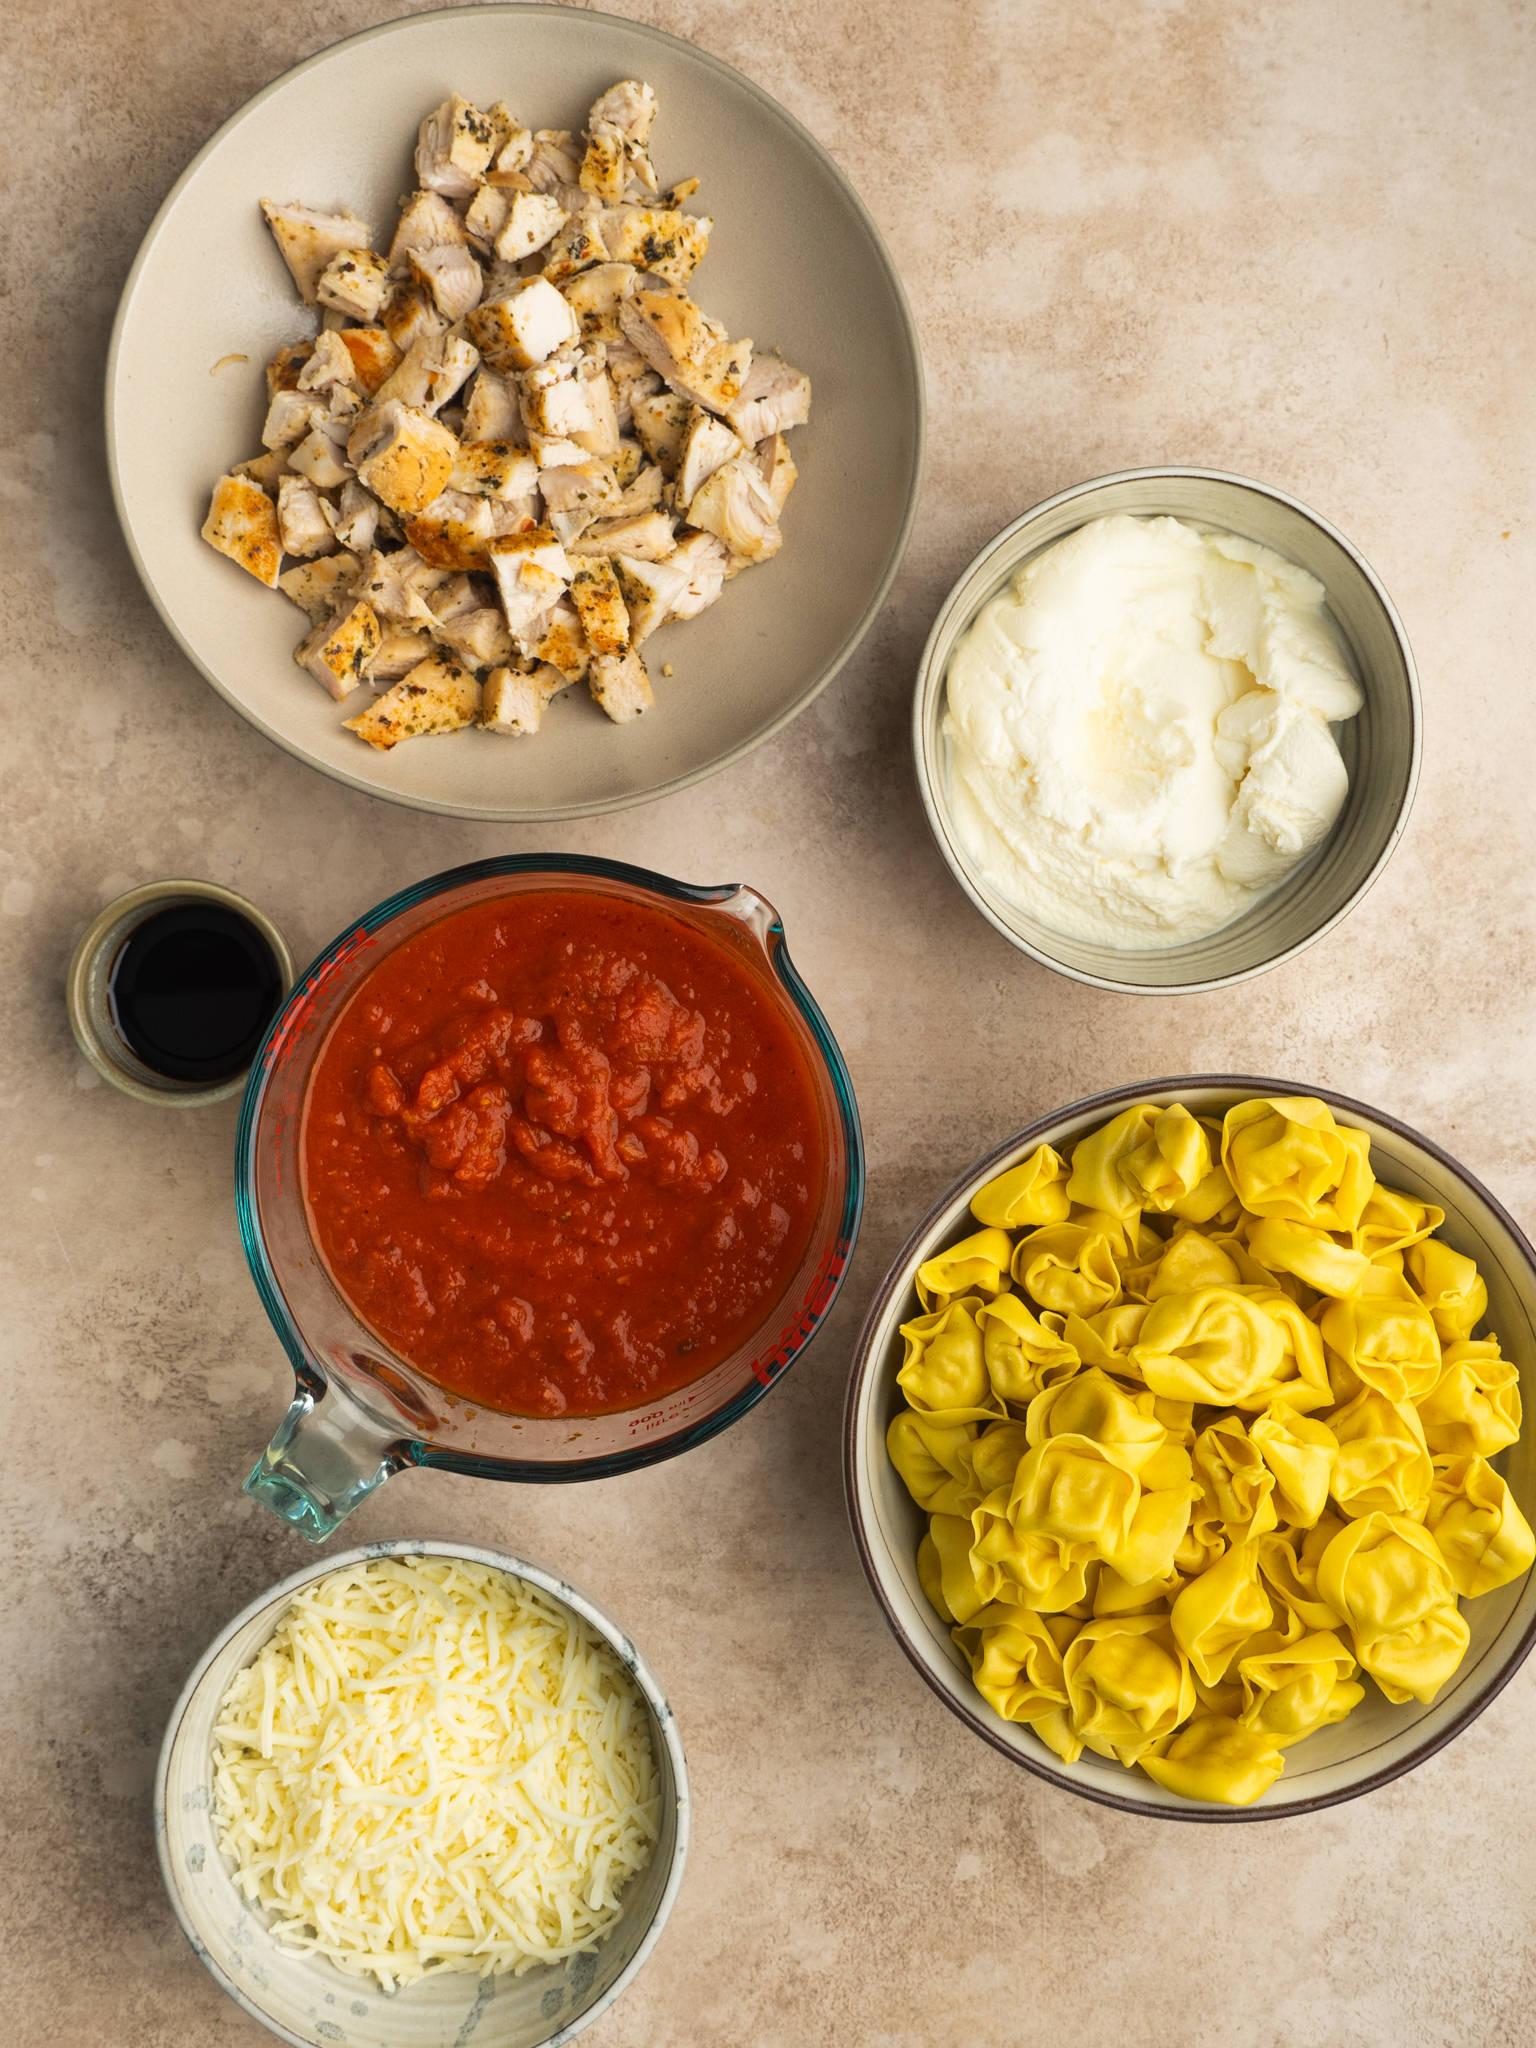 Ingredients for this baked recipe with tortellini